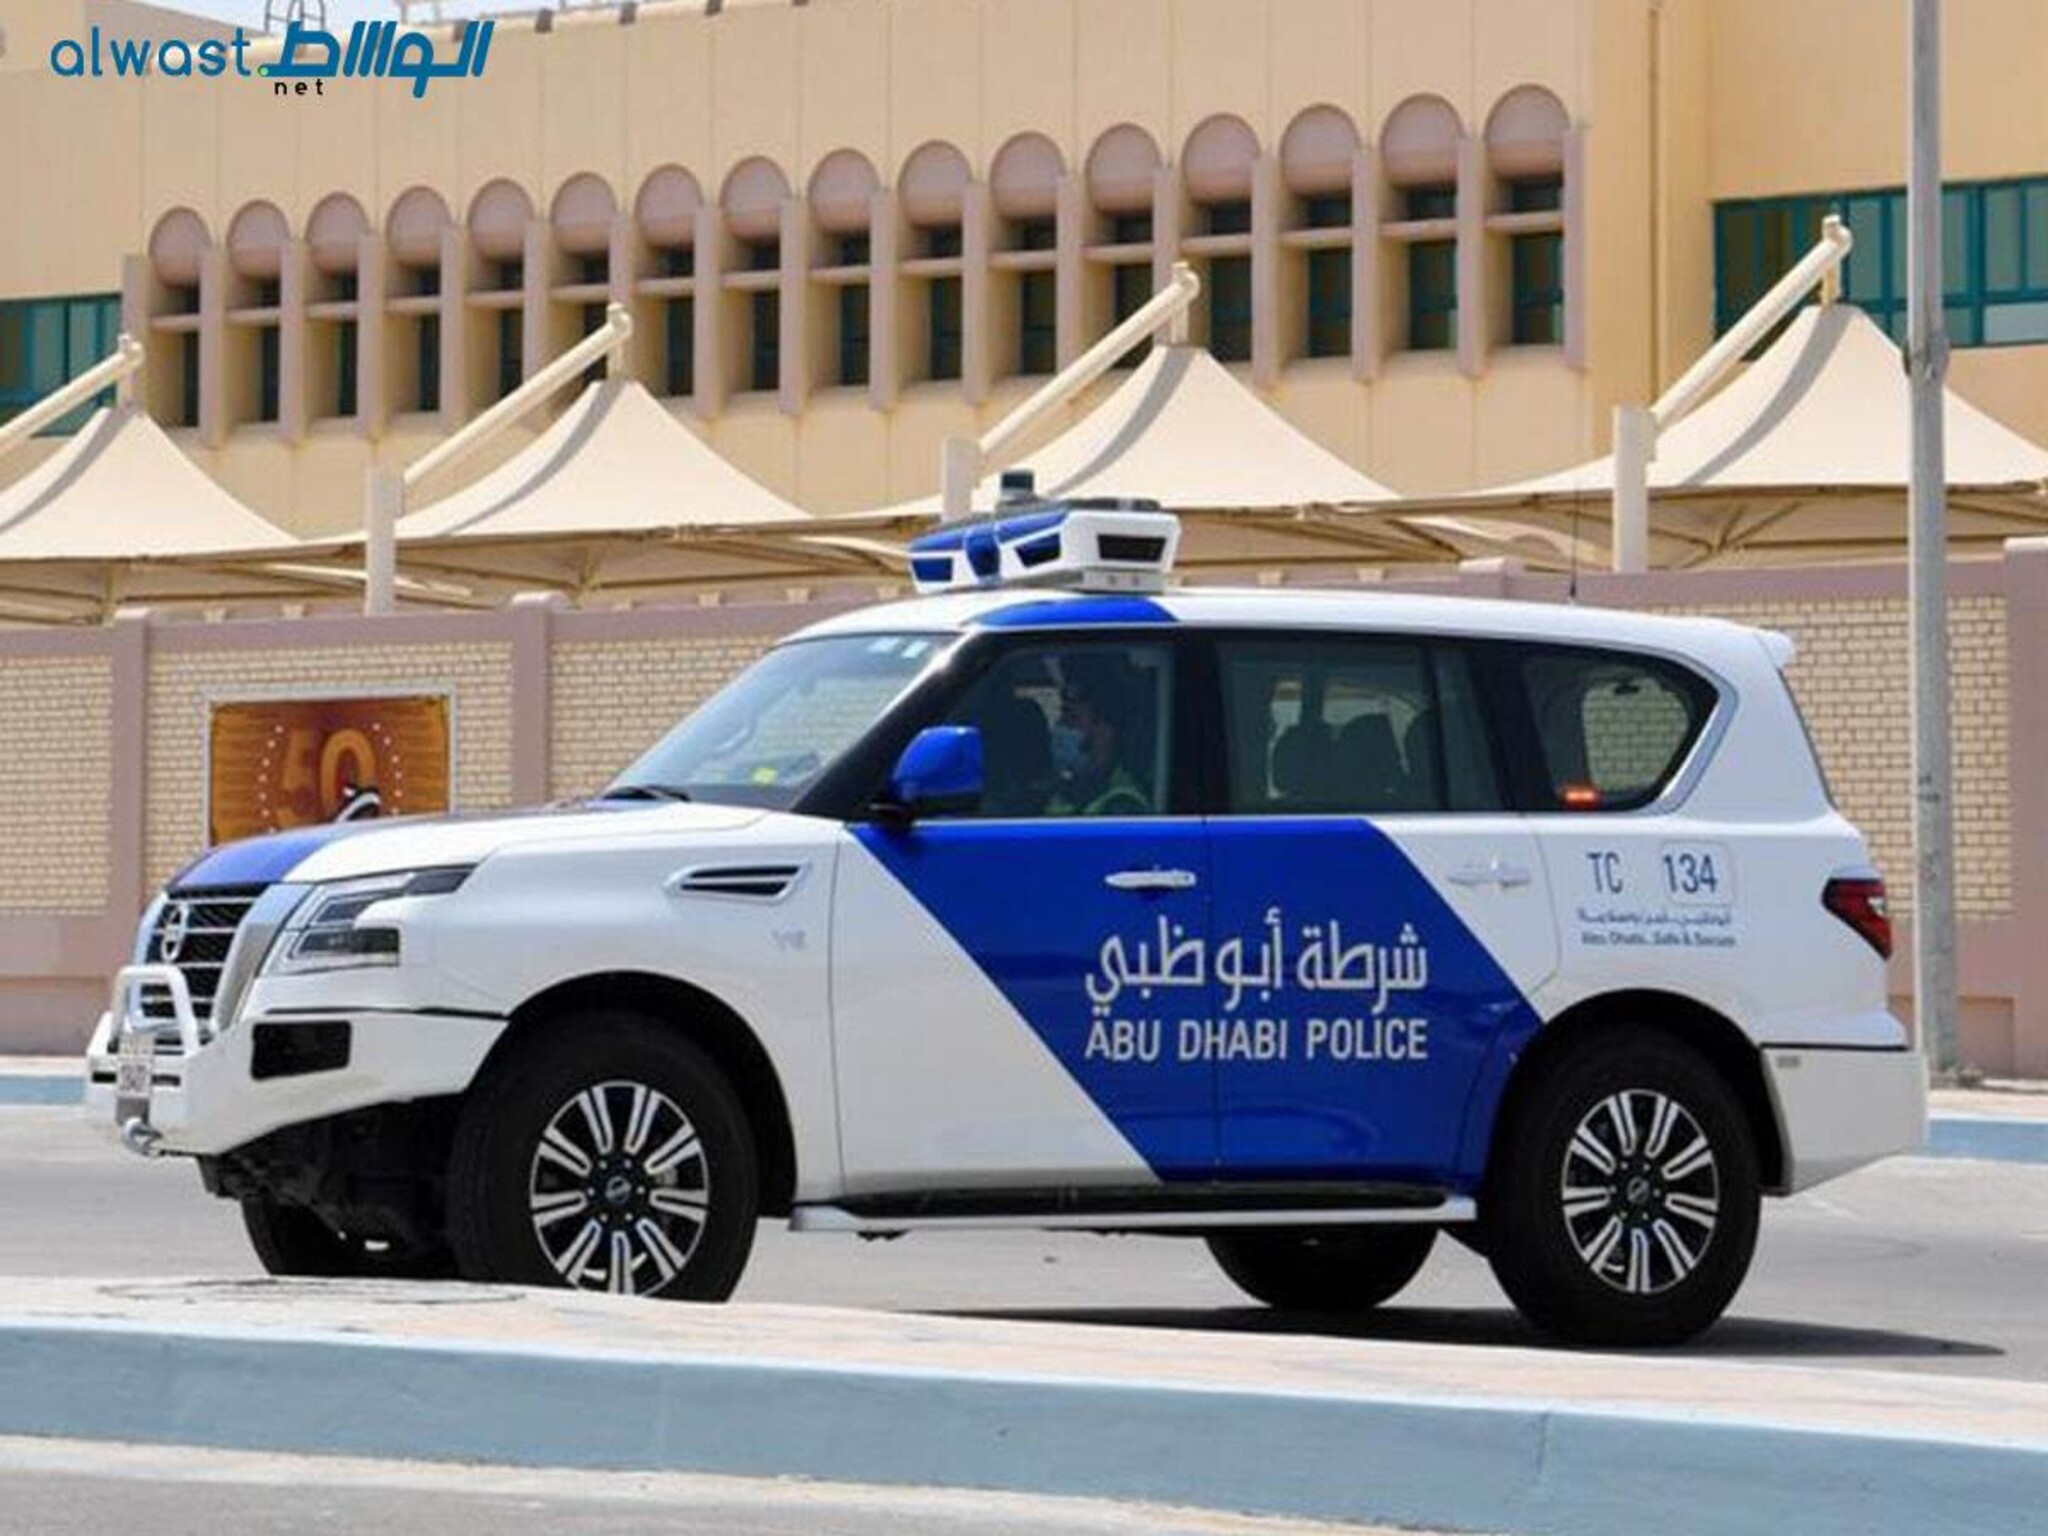 Abu Dhabi Police Launch a New Initiative with a 35% Discount on Traffic Fines